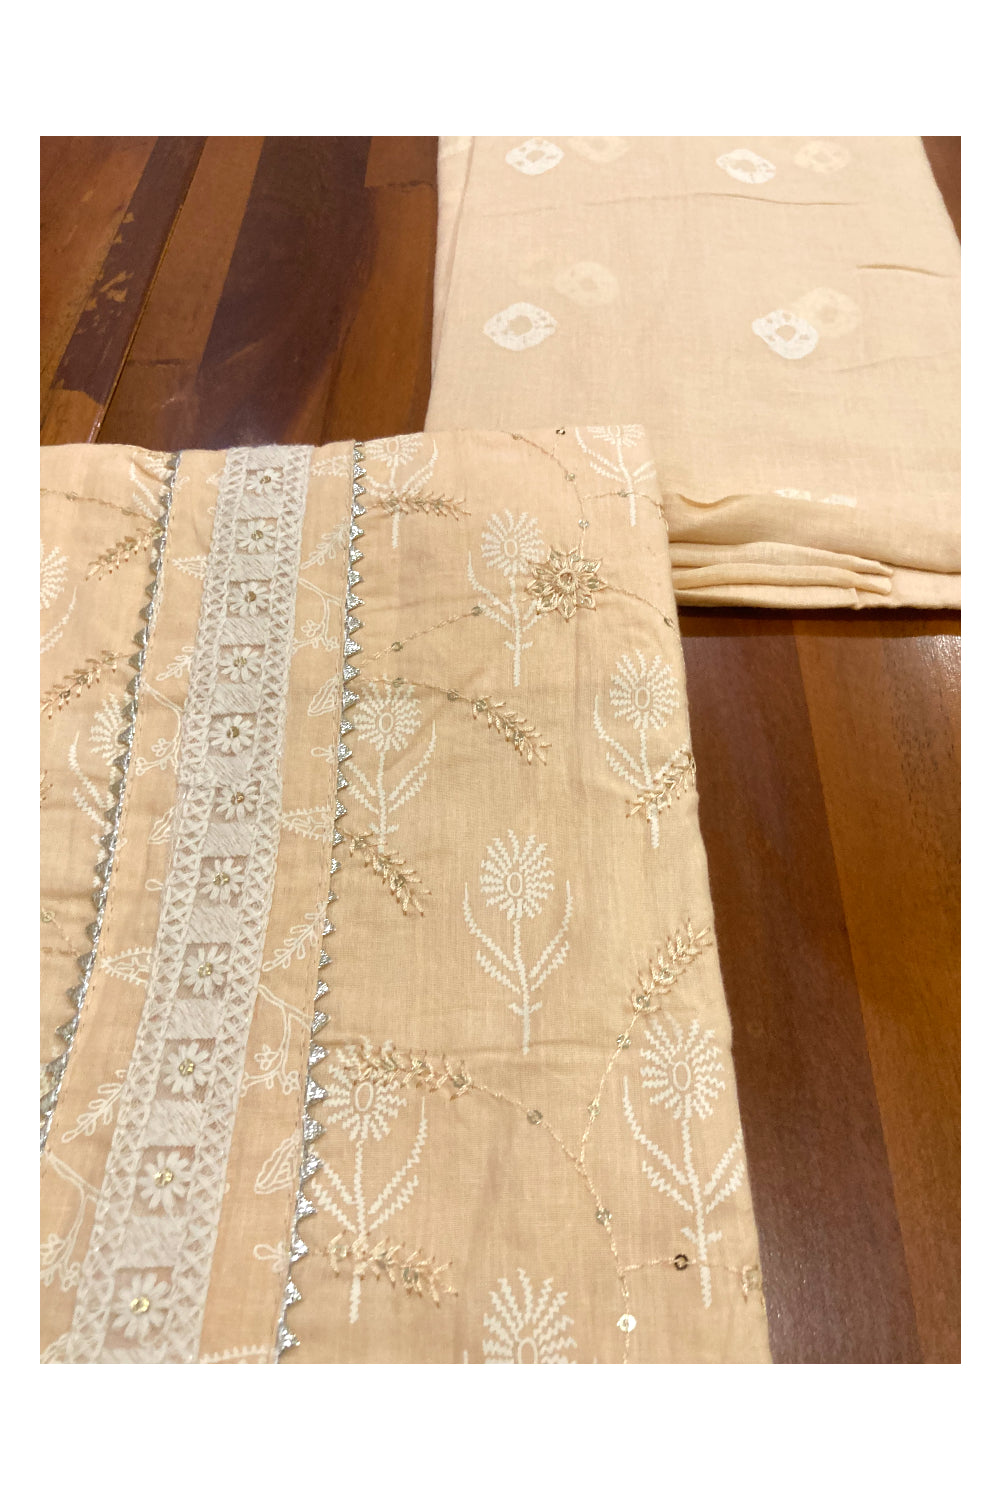 Southloom™ Cotton Churidar Salwar Suit Material in Beige and Thread Works